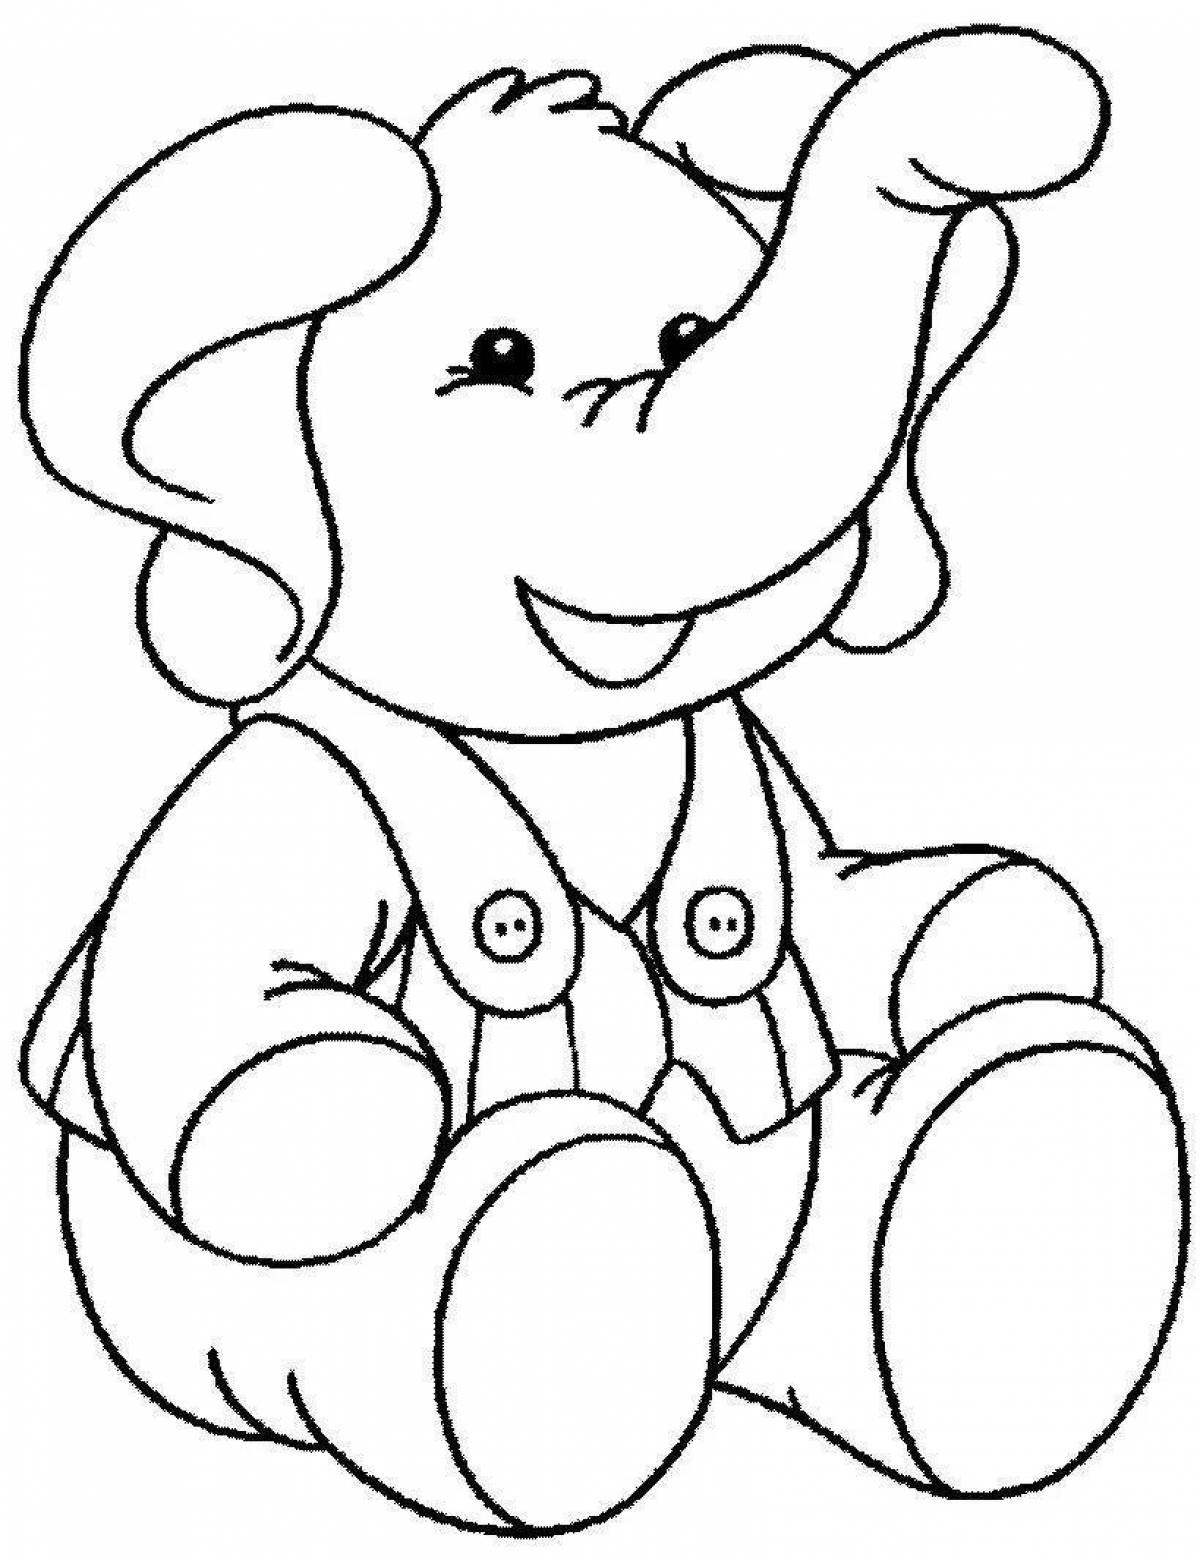 Cute print coloring book for toddlers